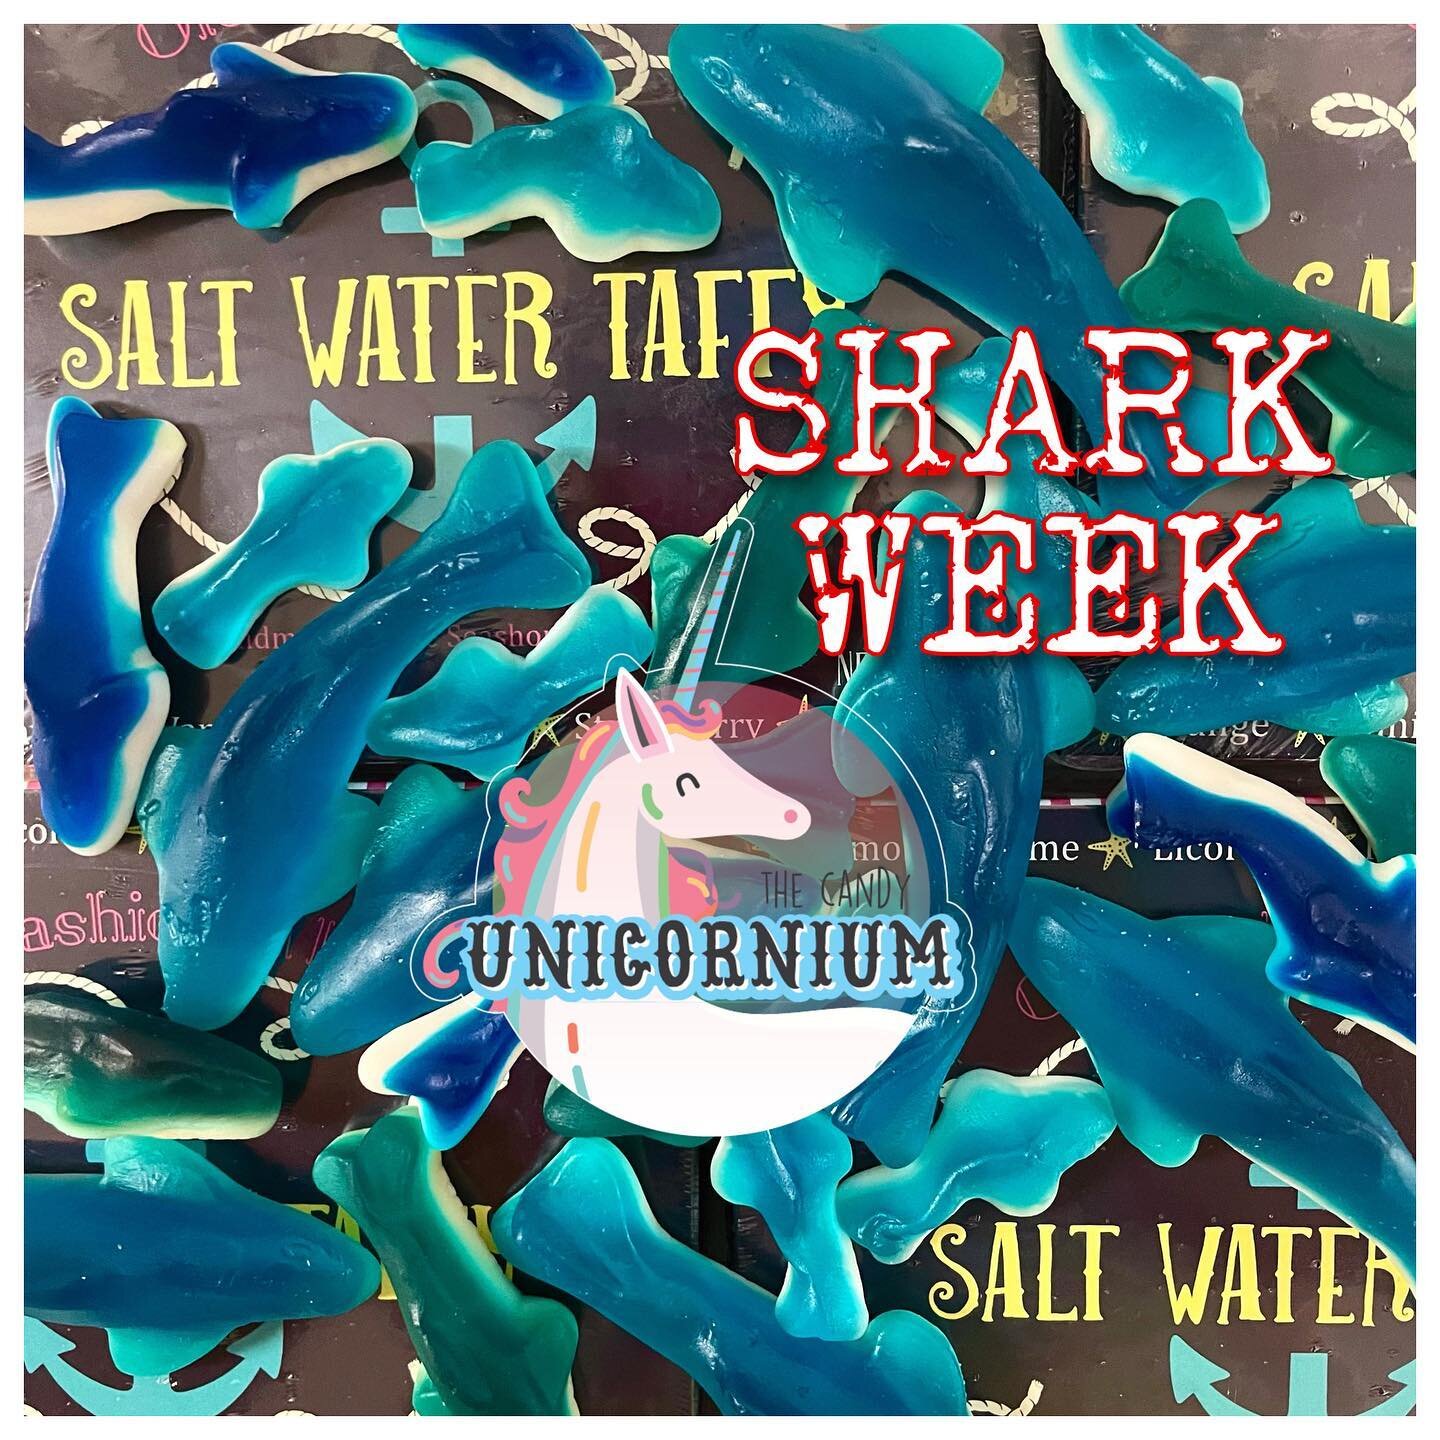 Its SHARK WEEK!!!!! The Candy Unicornium  is your go to spot for Gummy Sharks! 
From Baby Sharks to Giant Sharks your Shark Party will be Gummylicious! 
Open today until 7:00PM!!!!!! #TheCandyUnicornium #GummySharks #SharkWeek #CandyShoppe #candyCand